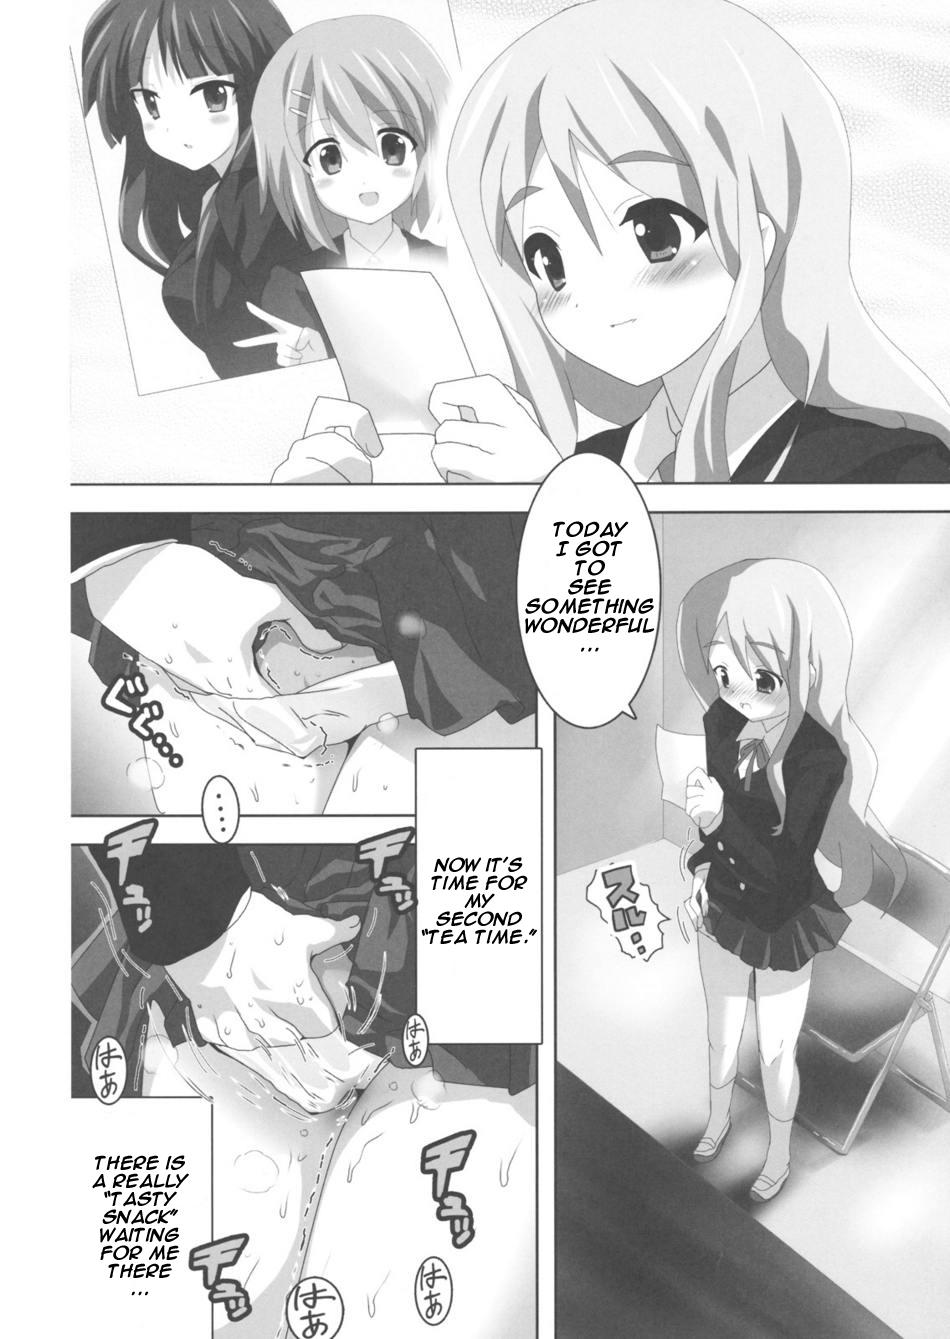 Stripping K-ON Bon?! - K-on Gay Medical - Page 10